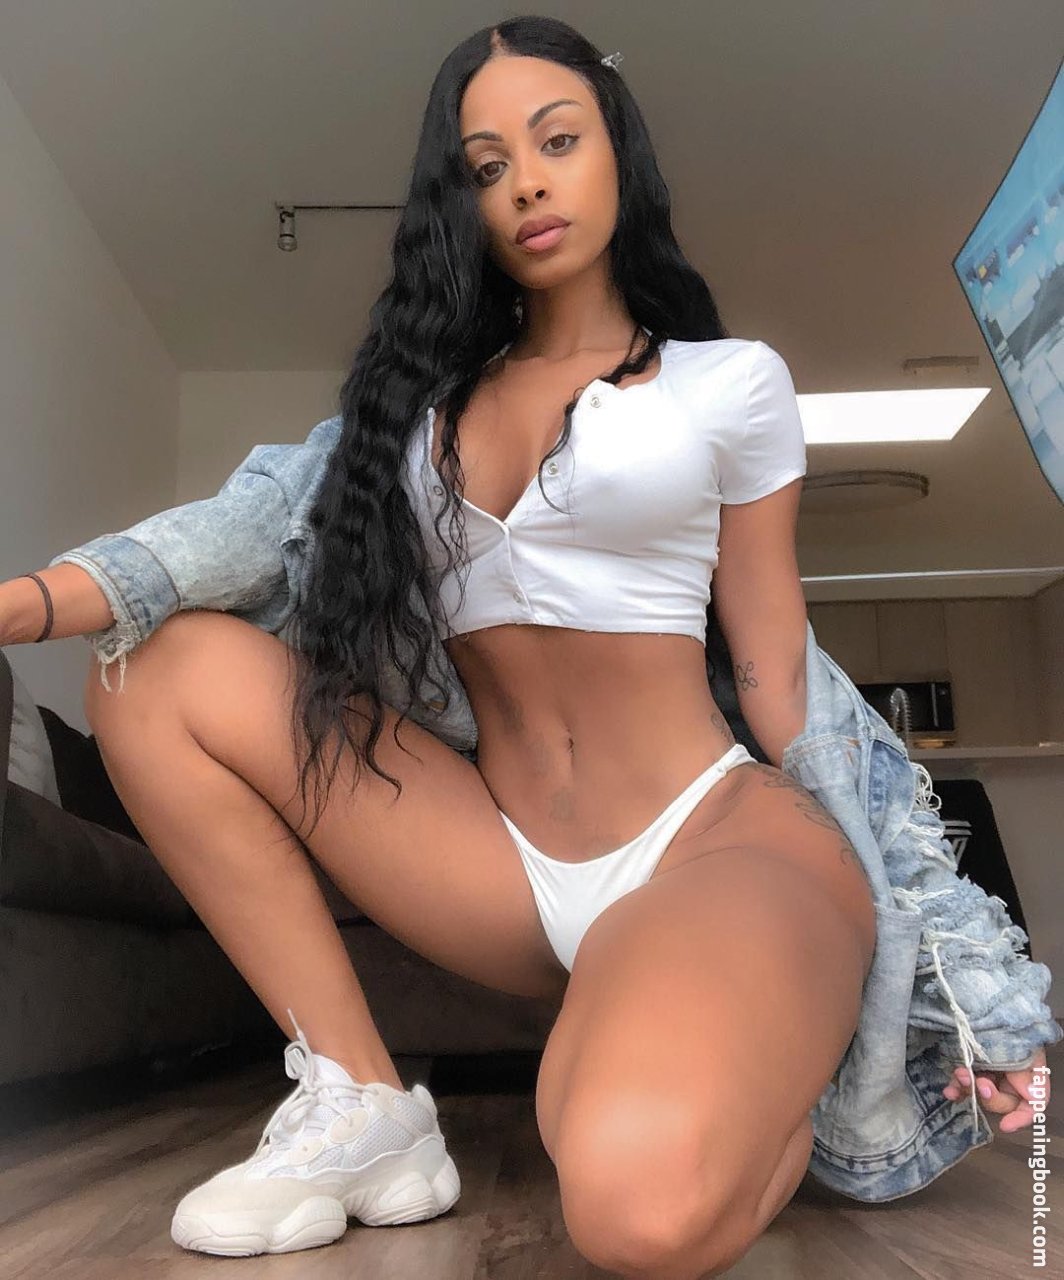 Chaves onlyfans analicia Analicia Chaves